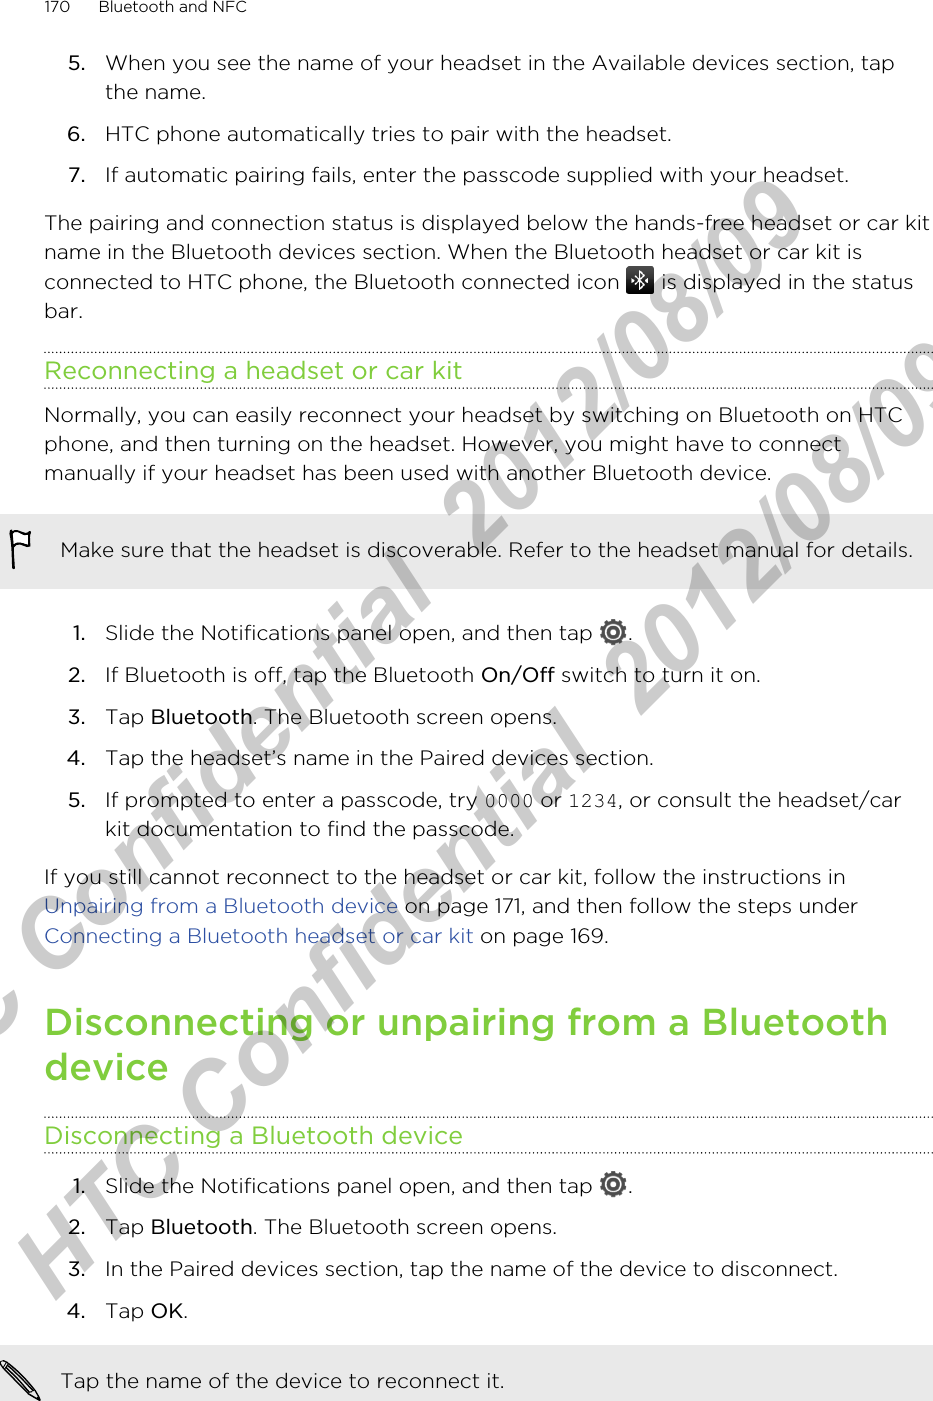 5. When you see the name of your headset in the Available devices section, tapthe name.6. HTC phone automatically tries to pair with the headset.7. If automatic pairing fails, enter the passcode supplied with your headset.The pairing and connection status is displayed below the hands-free headset or car kitname in the Bluetooth devices section. When the Bluetooth headset or car kit isconnected to HTC phone, the Bluetooth connected icon   is displayed in the statusbar.Reconnecting a headset or car kitNormally, you can easily reconnect your headset by switching on Bluetooth on HTCphone, and then turning on the headset. However, you might have to connectmanually if your headset has been used with another Bluetooth device.Make sure that the headset is discoverable. Refer to the headset manual for details.1. Slide the Notifications panel open, and then tap  .2. If Bluetooth is off, tap the Bluetooth On/Off switch to turn it on.3. Tap Bluetooth. The Bluetooth screen opens.4. Tap the headset’s name in the Paired devices section.5. If prompted to enter a passcode, try 0000 or 1234, or consult the headset/carkit documentation to find the passcode.If you still cannot reconnect to the headset or car kit, follow the instructions in Unpairing from a Bluetooth device on page 171, and then follow the steps under Connecting a Bluetooth headset or car kit on page 169.Disconnecting or unpairing from a BluetoothdeviceDisconnecting a Bluetooth device1. Slide the Notifications panel open, and then tap  .2. Tap Bluetooth. The Bluetooth screen opens.3. In the Paired devices section, tap the name of the device to disconnect.4. Tap OK.Tap the name of the device to reconnect it.170 Bluetooth and NFCHTC Confidential  2012/08/09  HTC Confidential  2012/08/09 